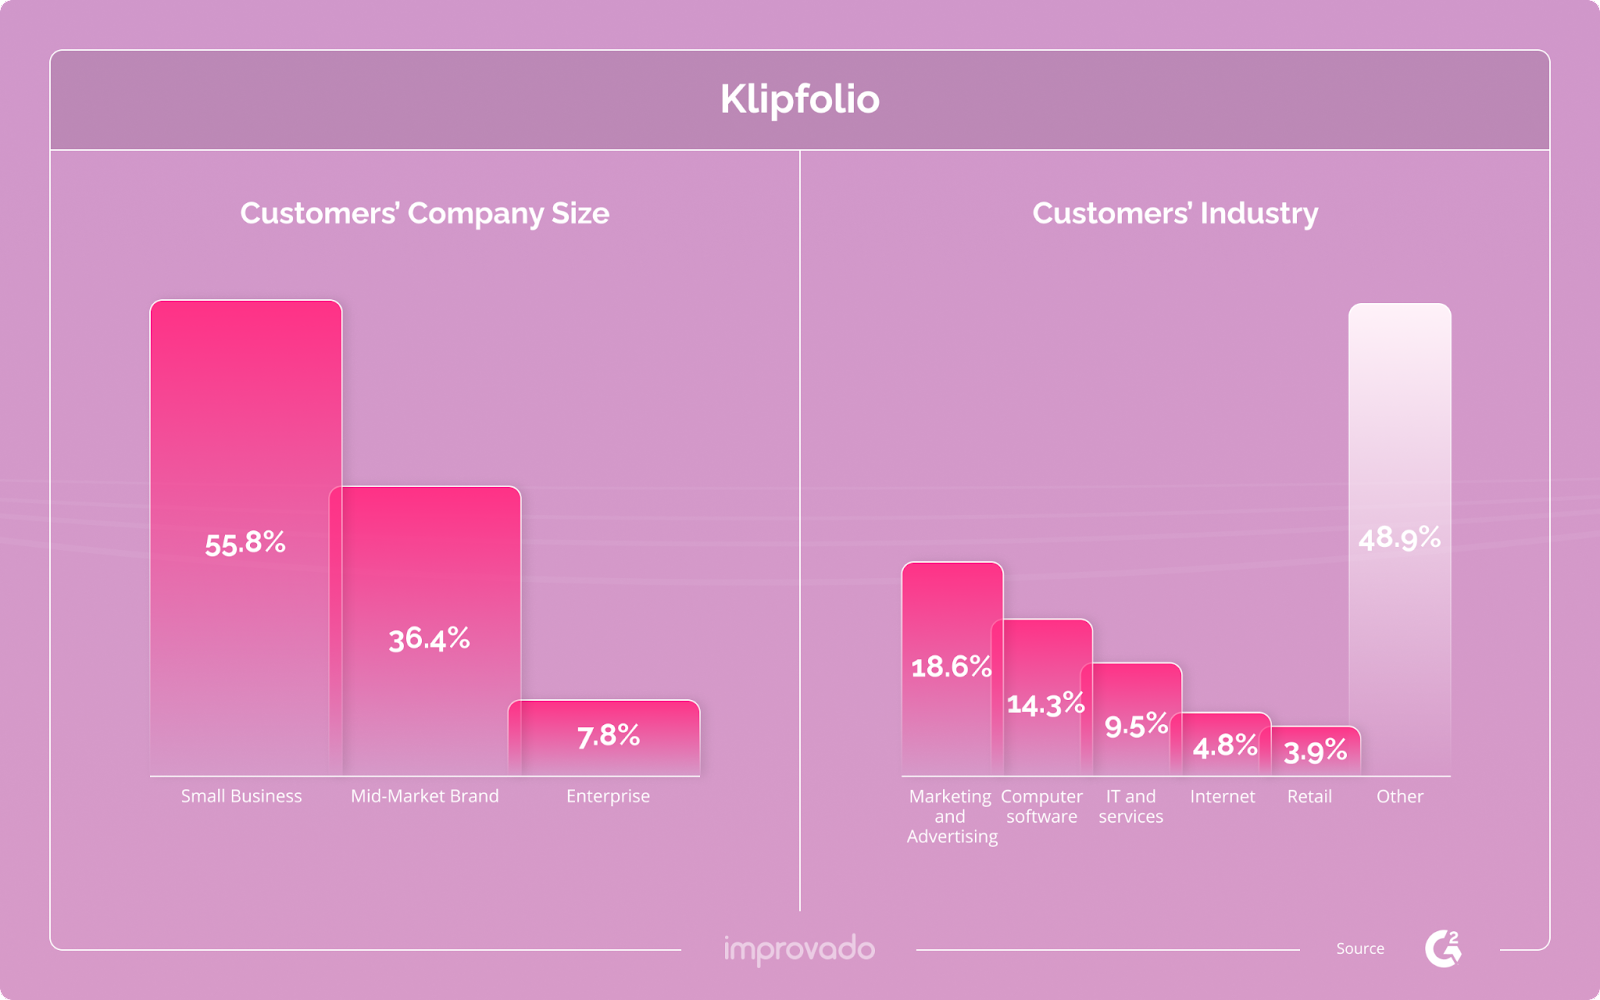 The majority of Klipfolio customers are small business owners.